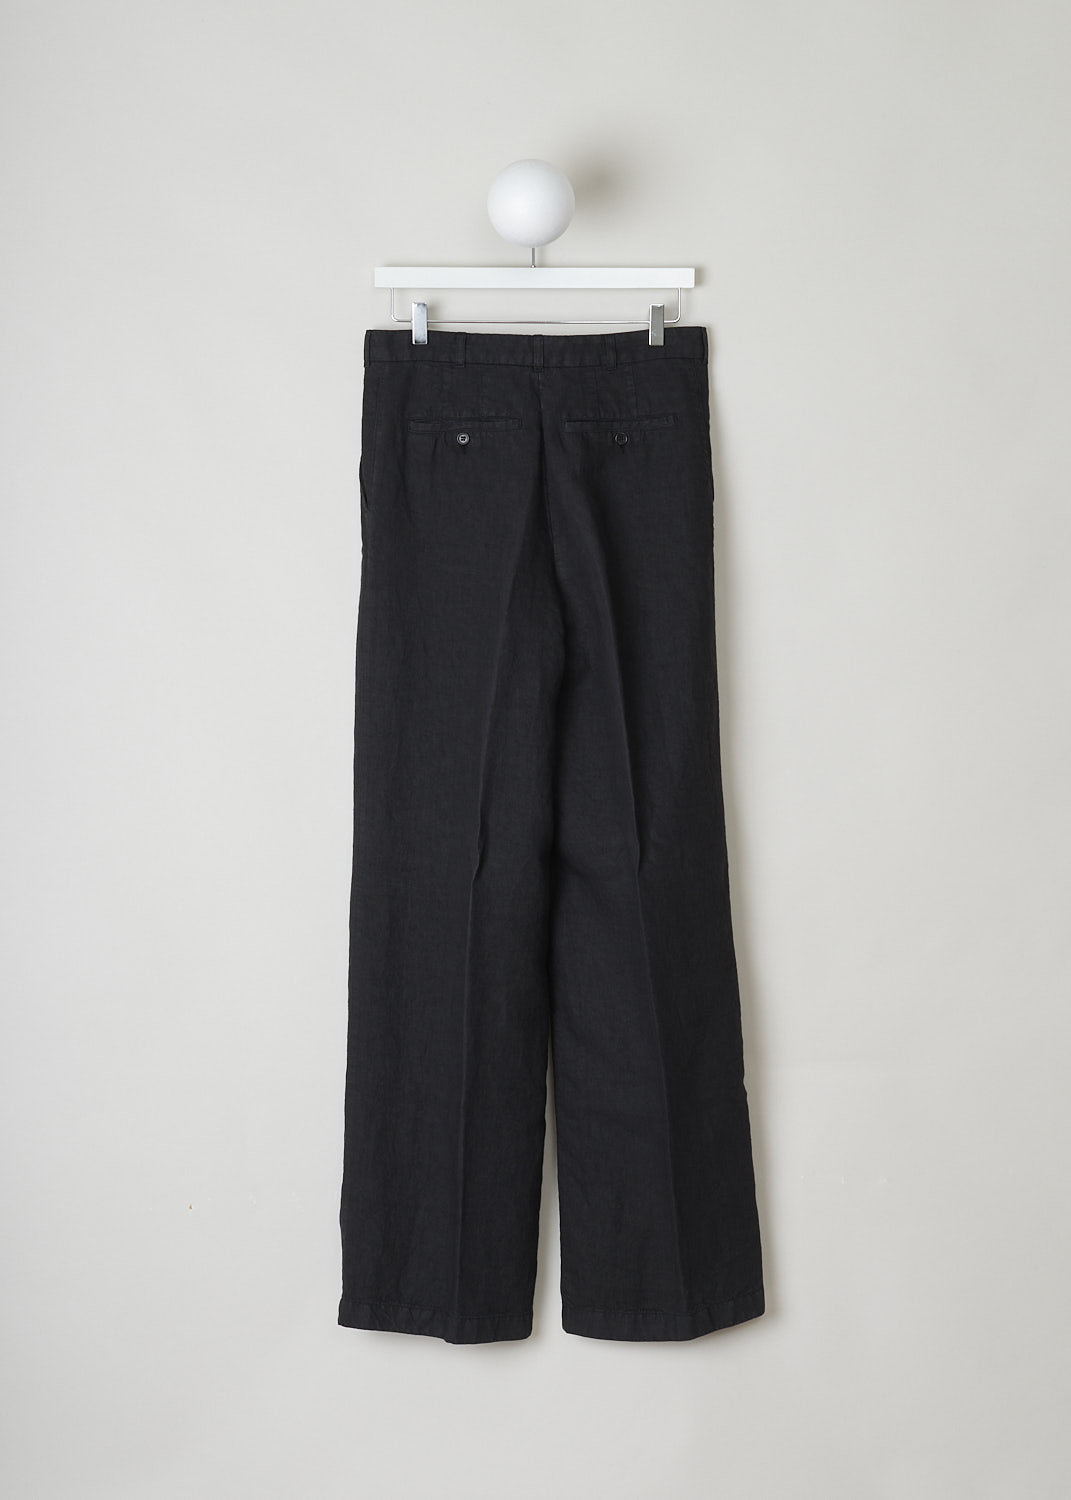 ASPESI, BLACK LINEN PANTS WITH STRAIGHT WIDE LEGS, H108_C253_85241, Black, Back, These black linen pants have a narrow waistband with belt loops. The closure option is a concealed hook and zipper. The straight wide pant legs have centre pleats The pants have forward slanted pockets in the front and buttoned welt pockets in the back.

